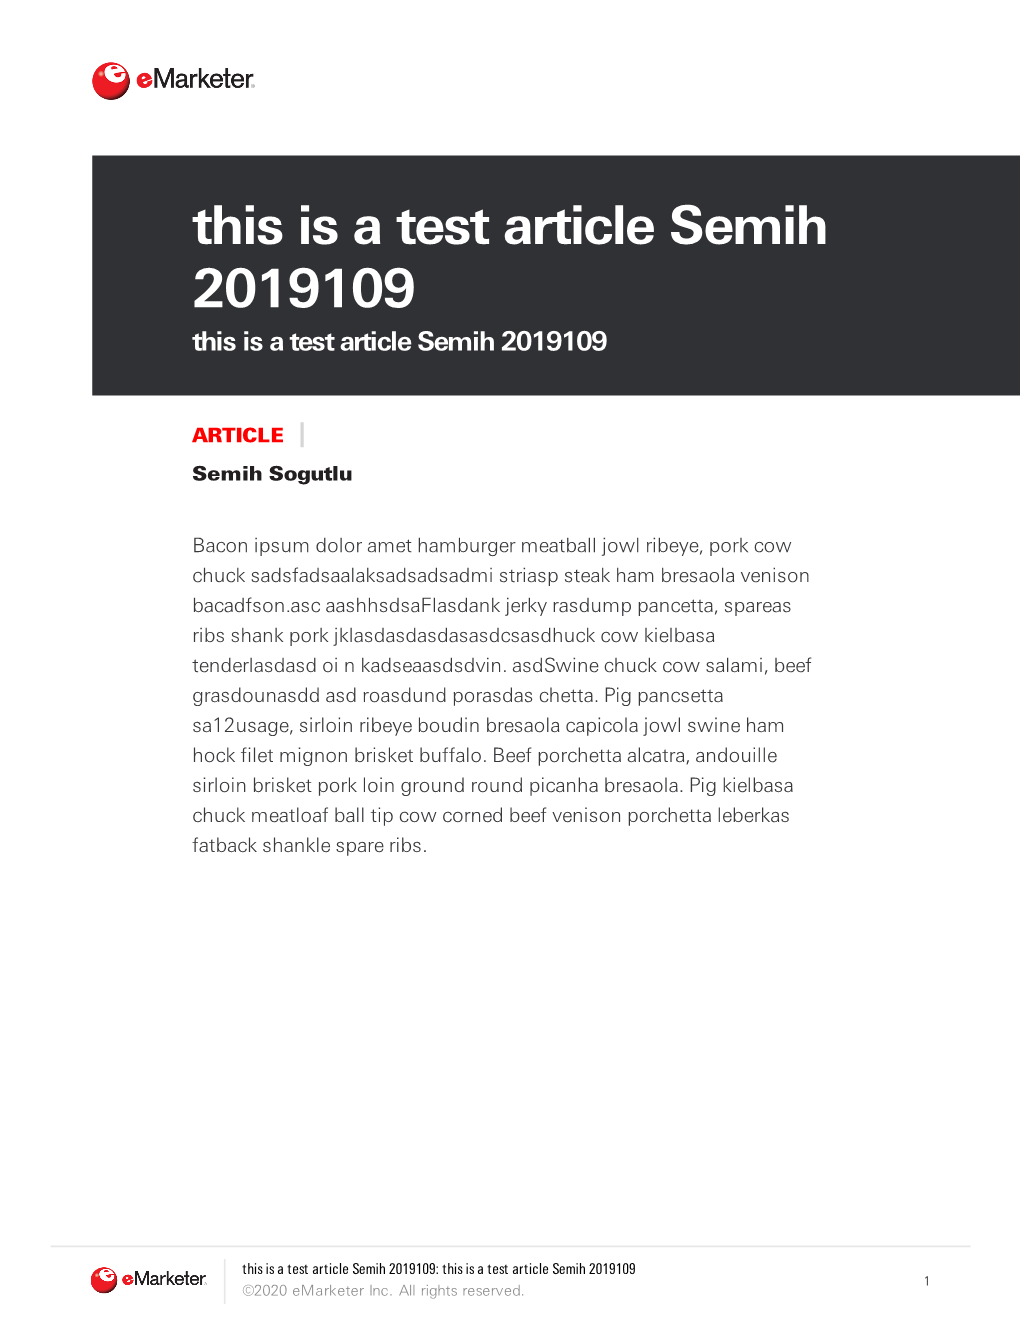 This Is a Test Article Semih 2019109 This Is a Test Article Semih 2019109